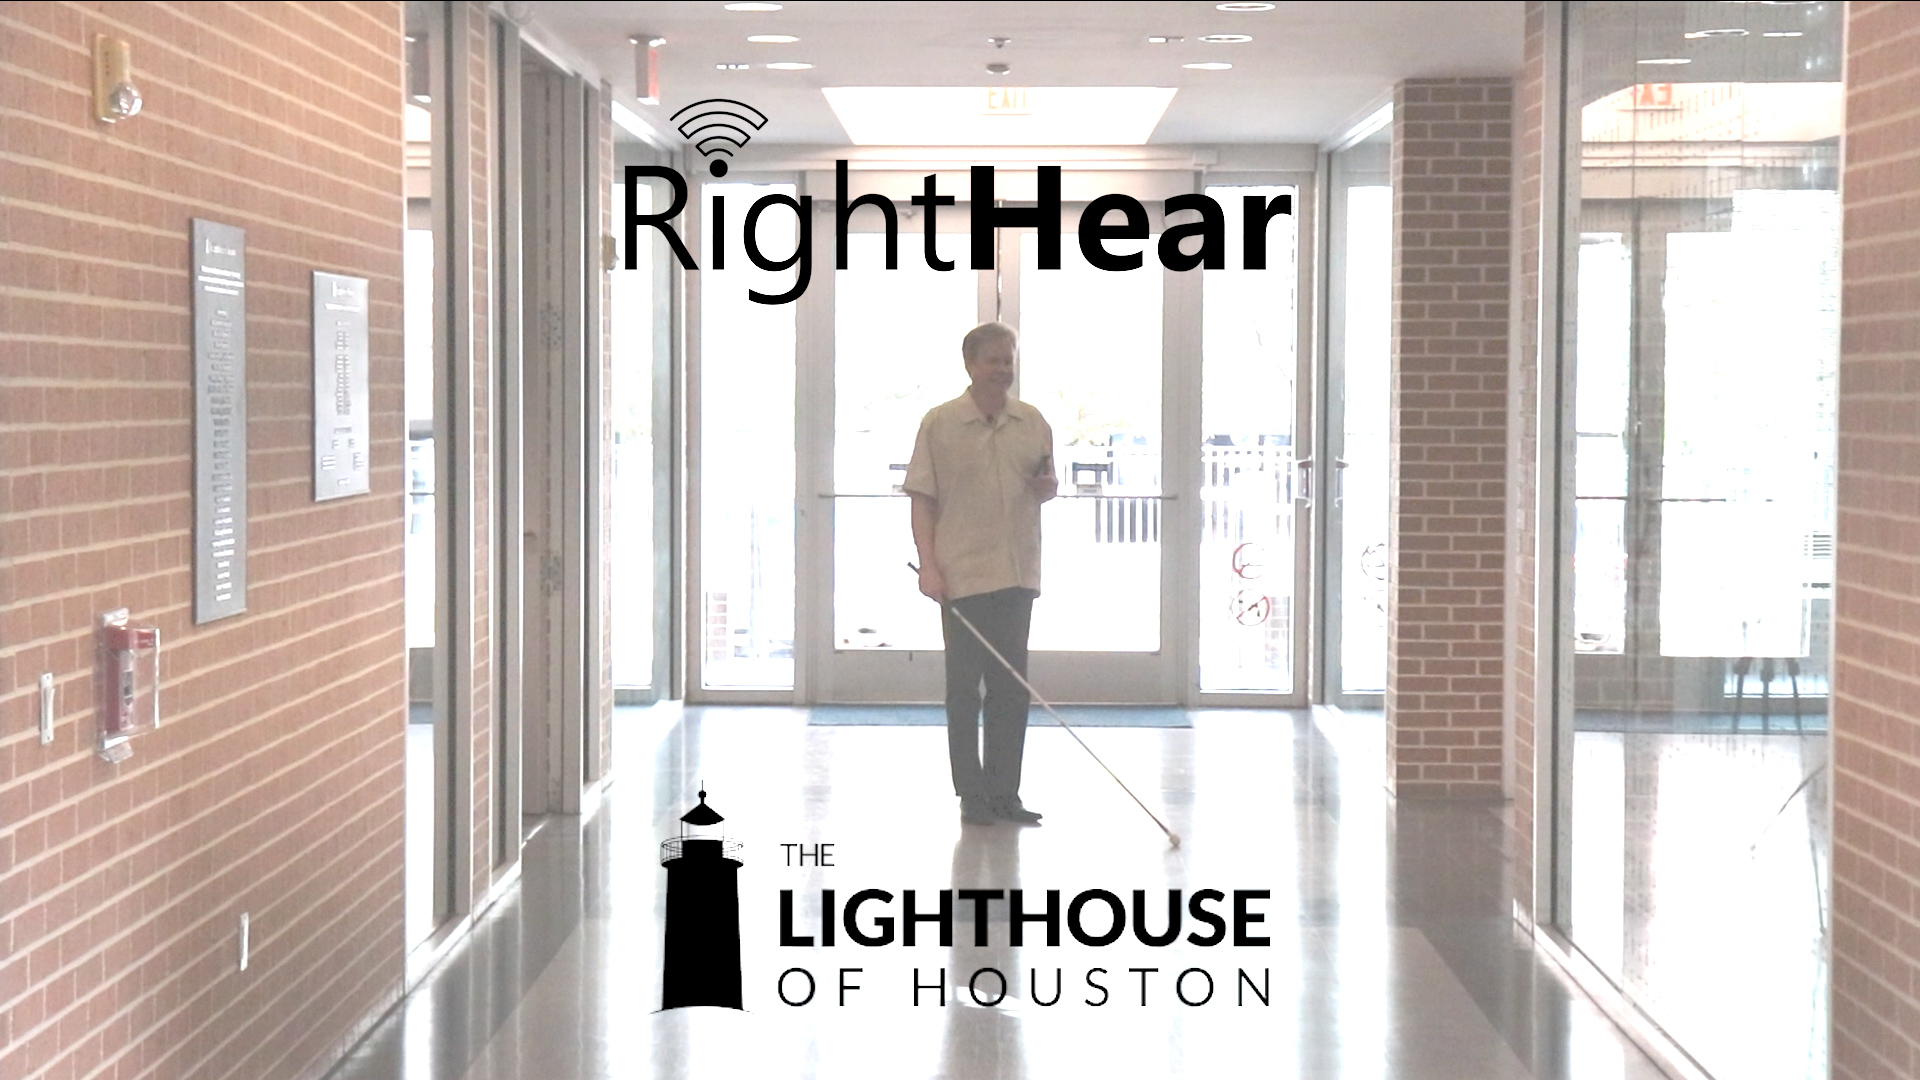 A man with a white cane standing in the main hallway at The Lighthouse of Houston. There are two black logos for RightHear and The Lighthouse of Houston.